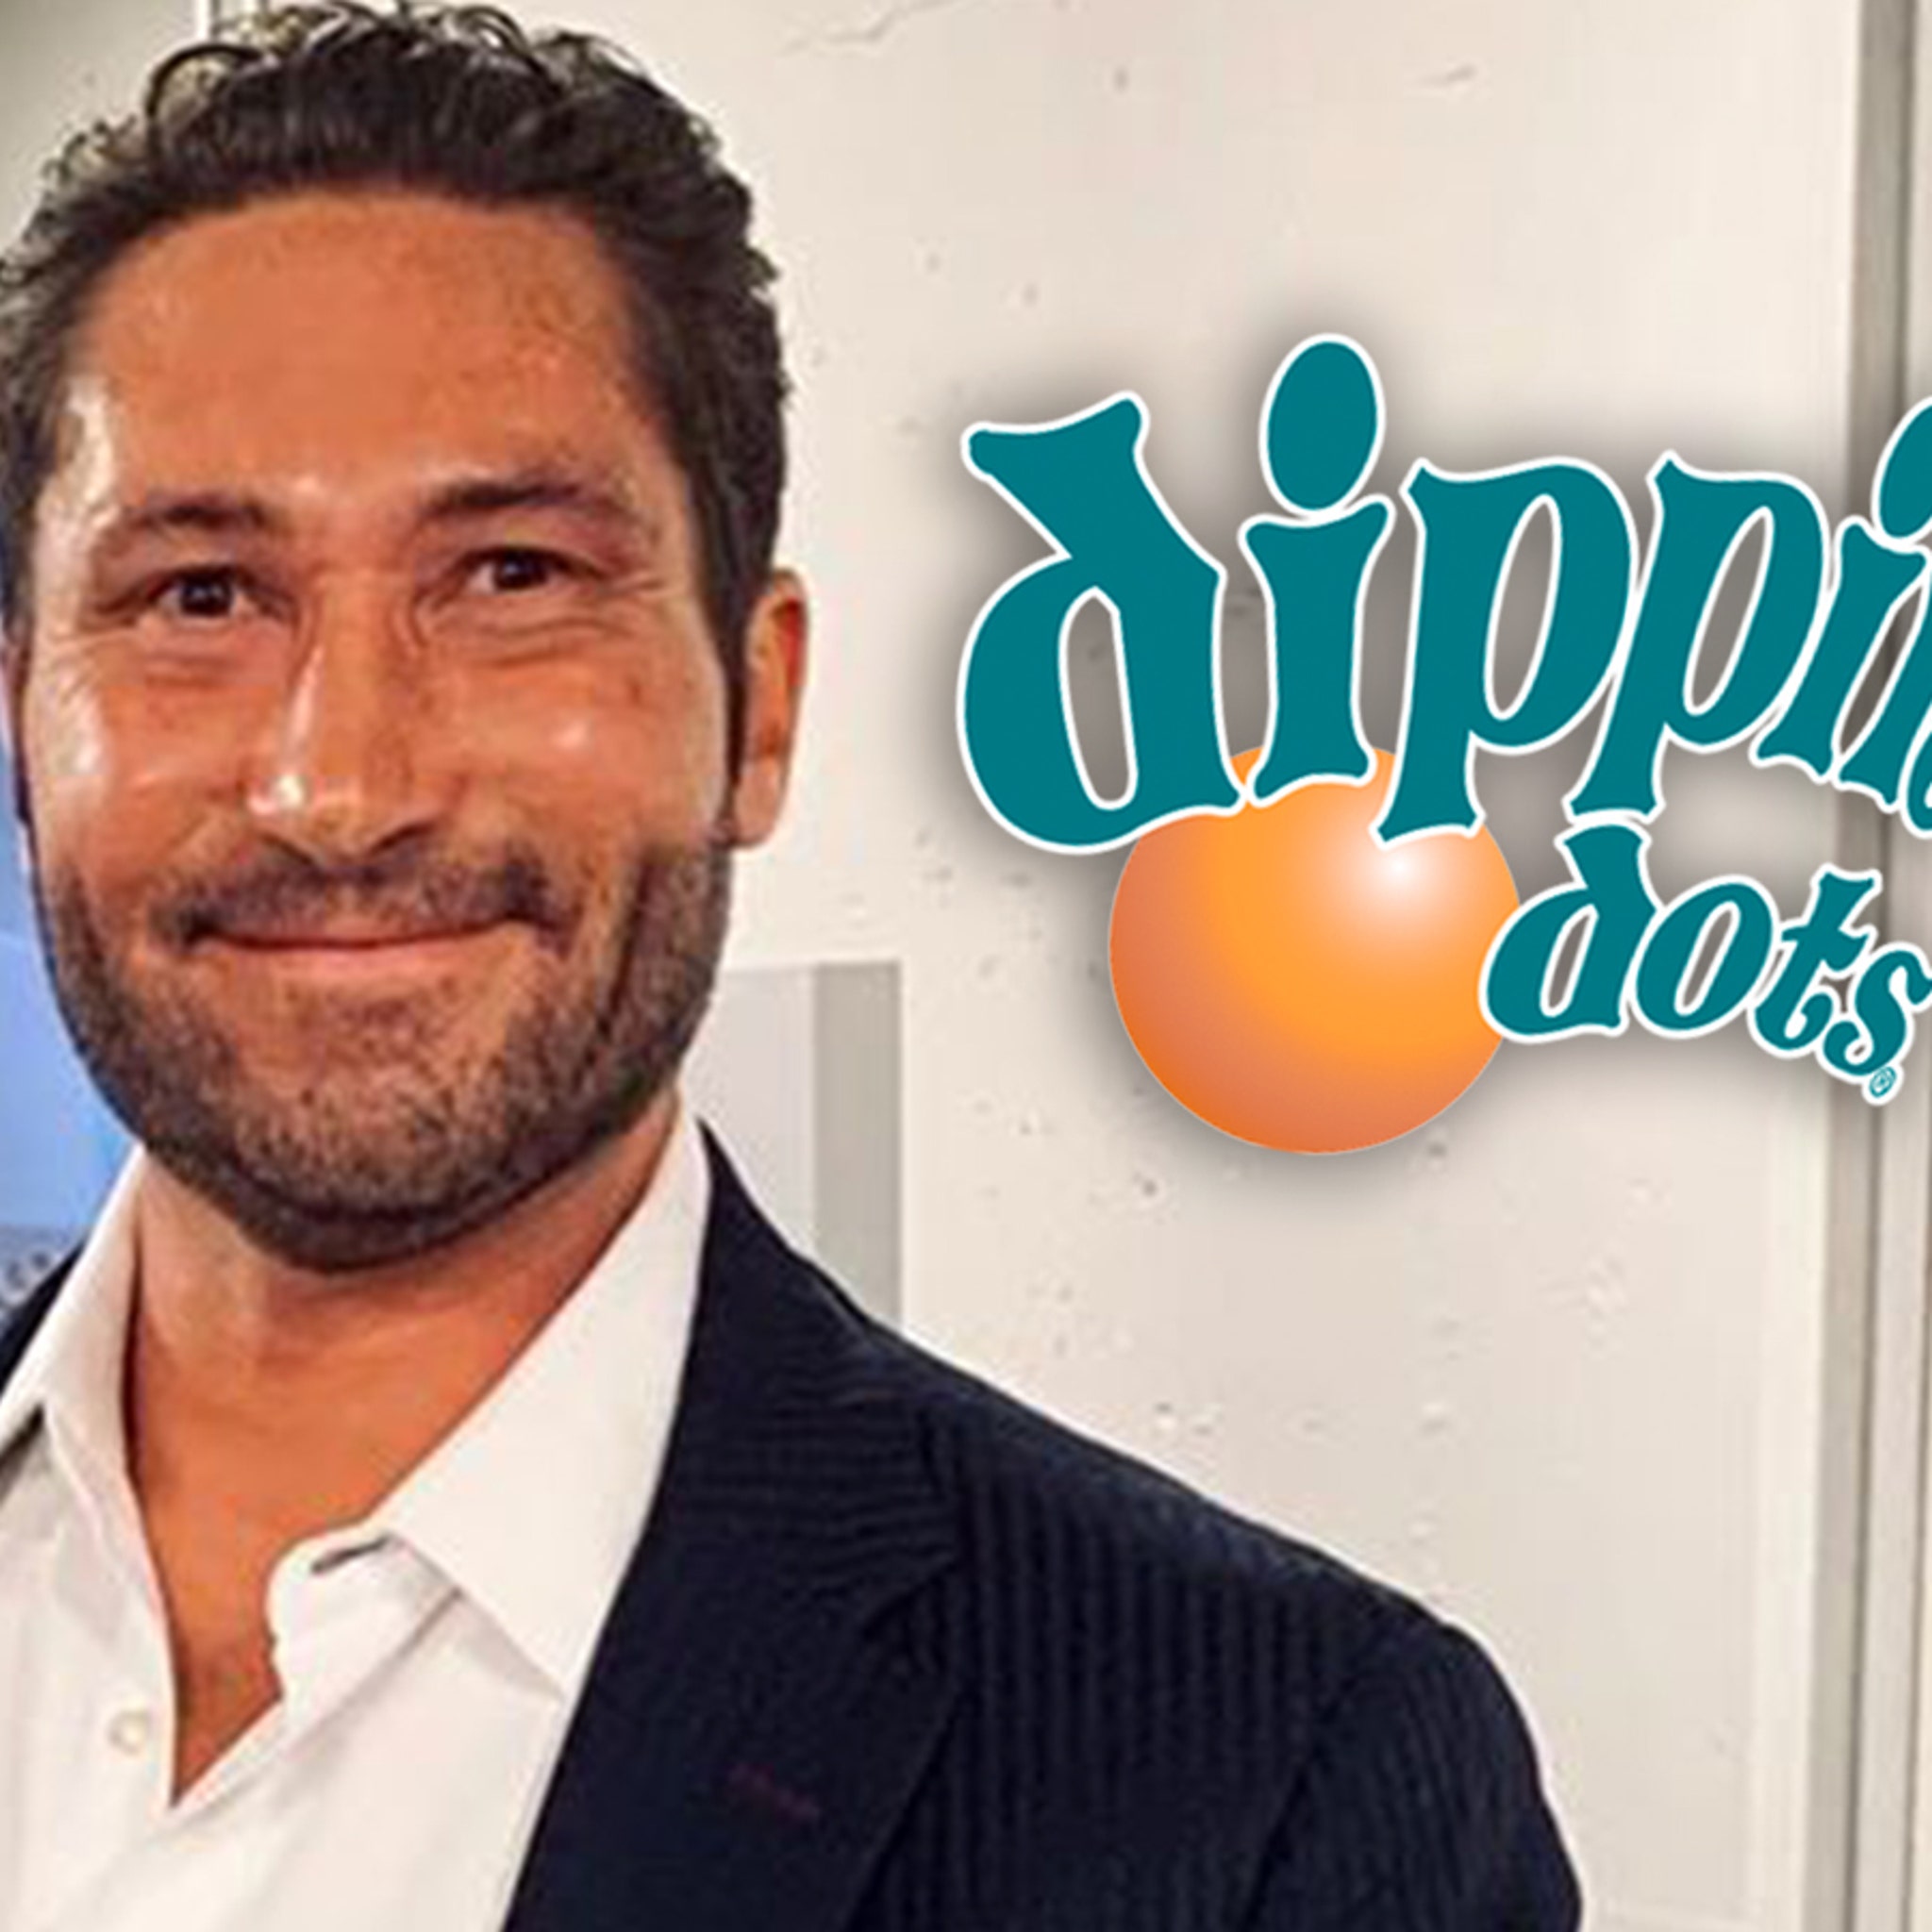 Dippin Dots CEO Sued by Ex-Girlfriend Over Alleged Revenge Porn pic